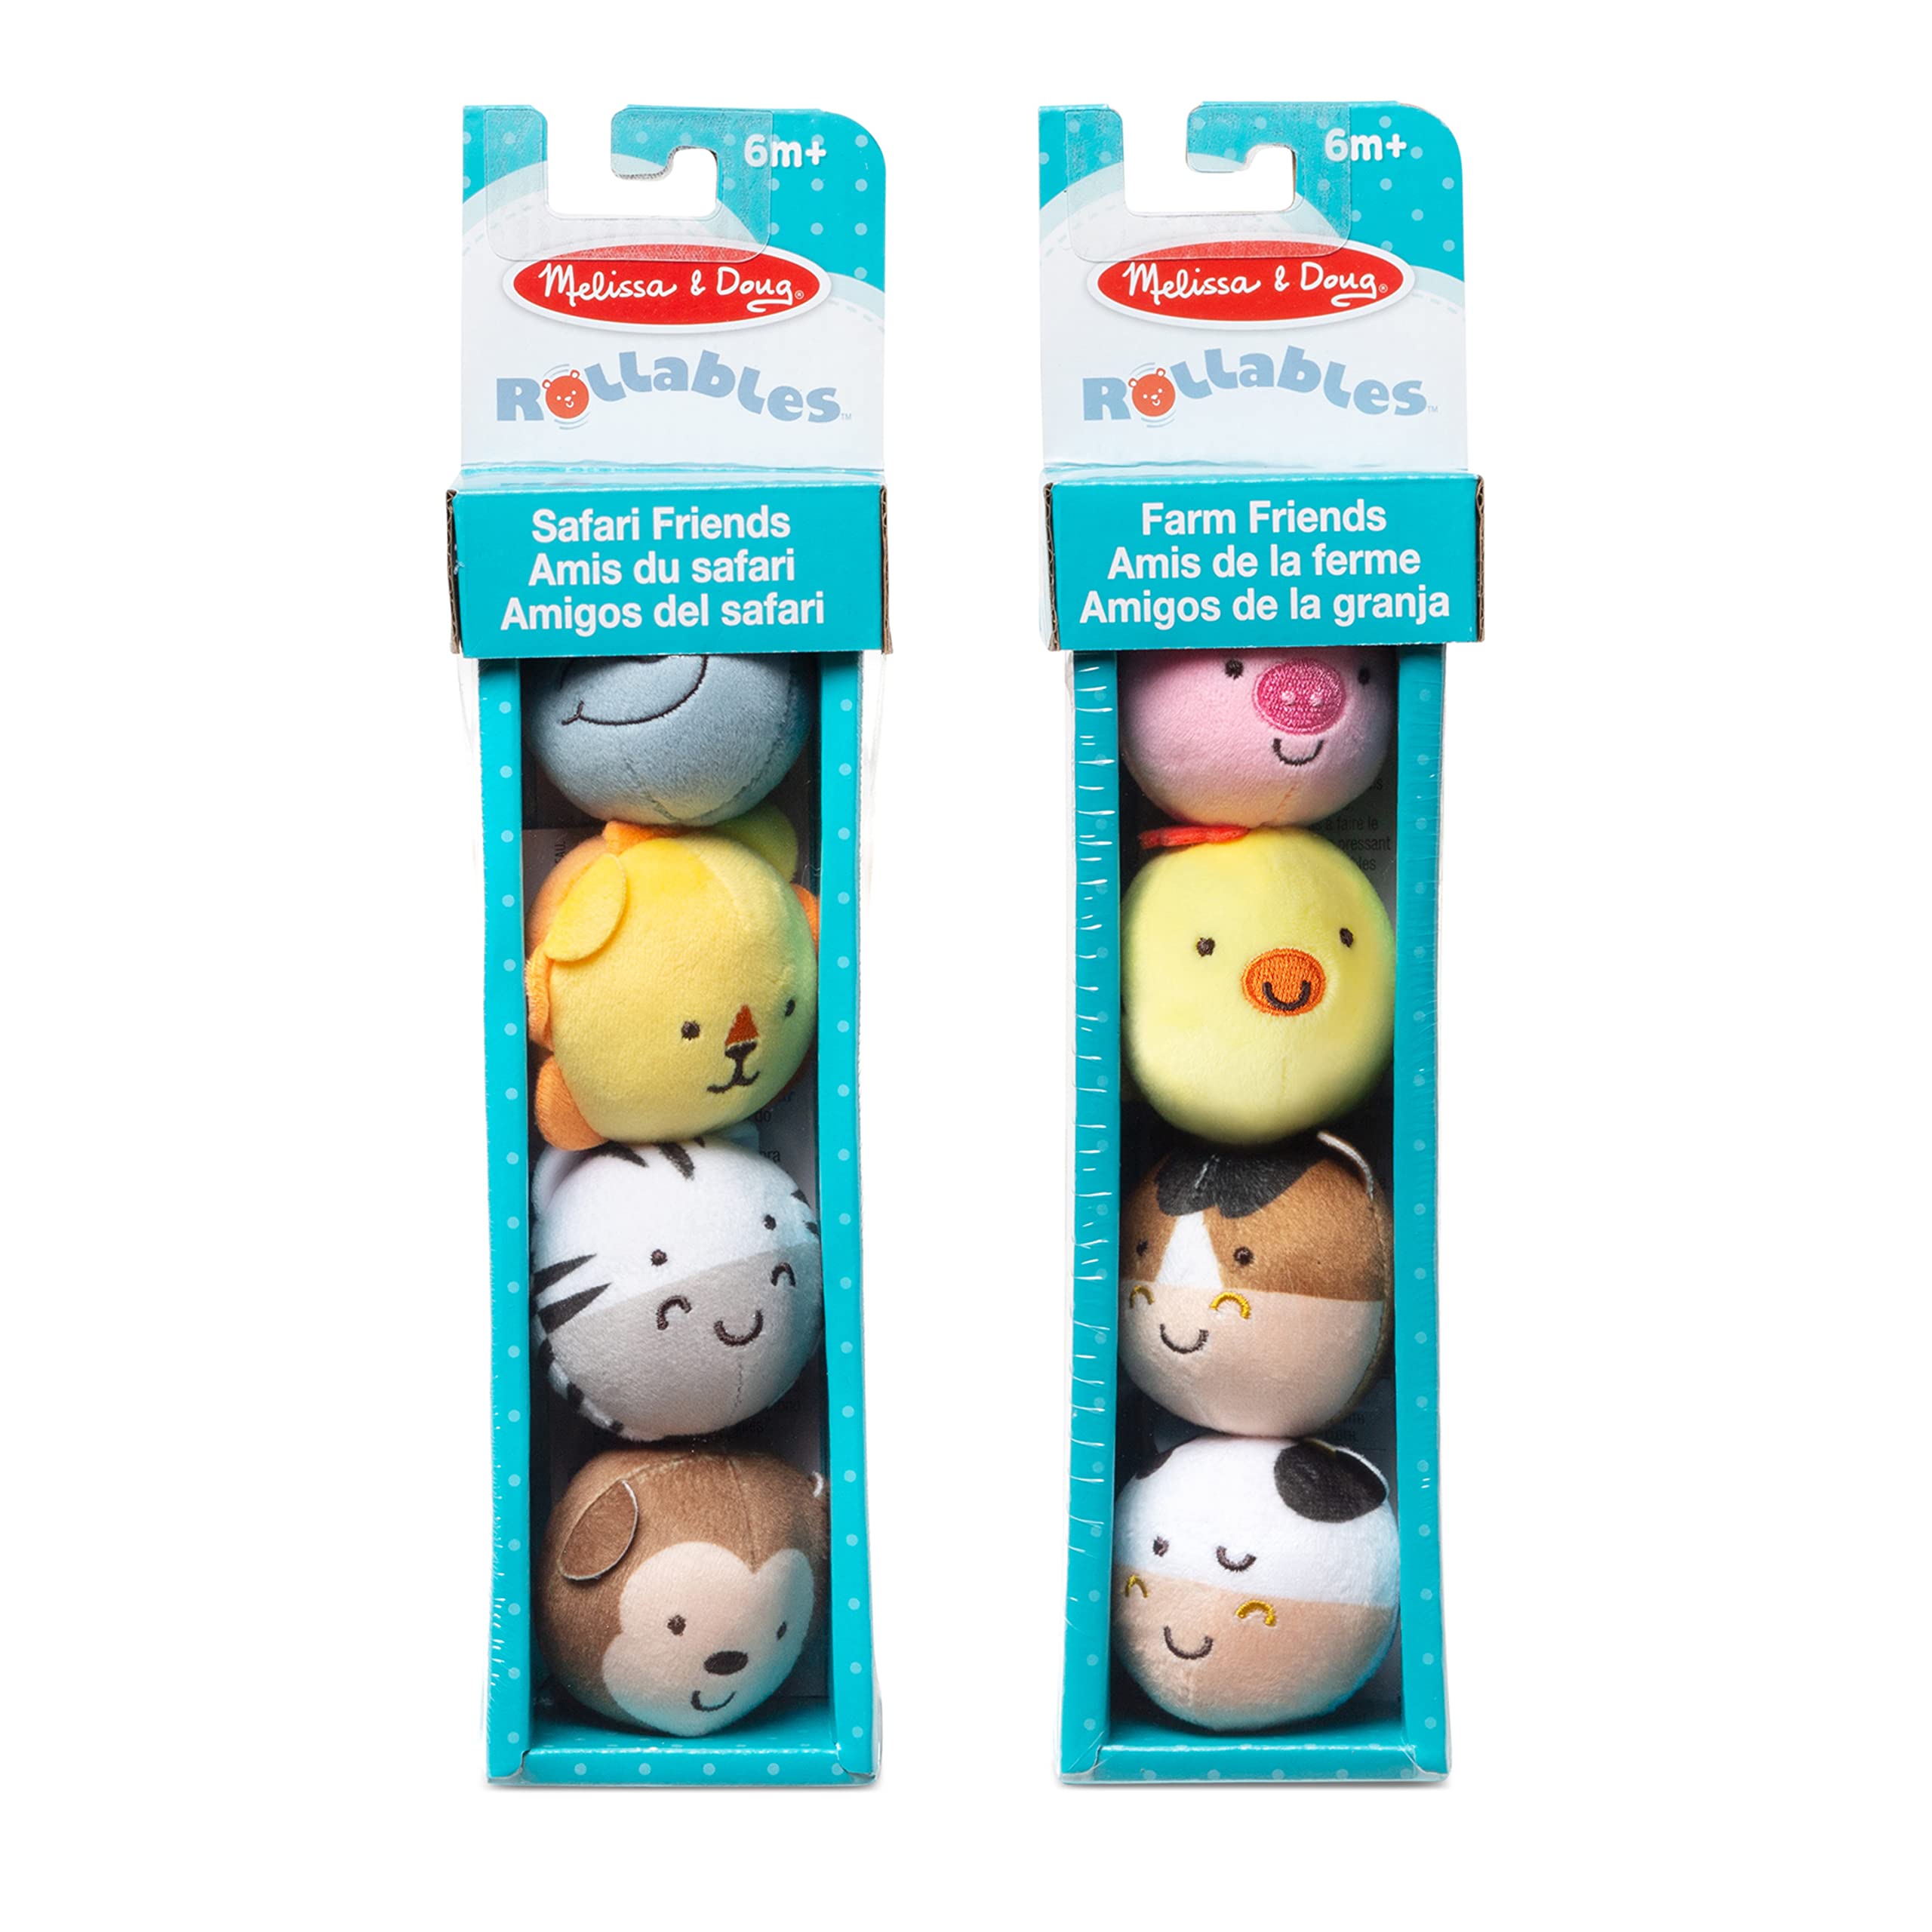 Melissa & Doug Rollables Safari and Farm Friends Infant and Toddler Toy 2-Pack